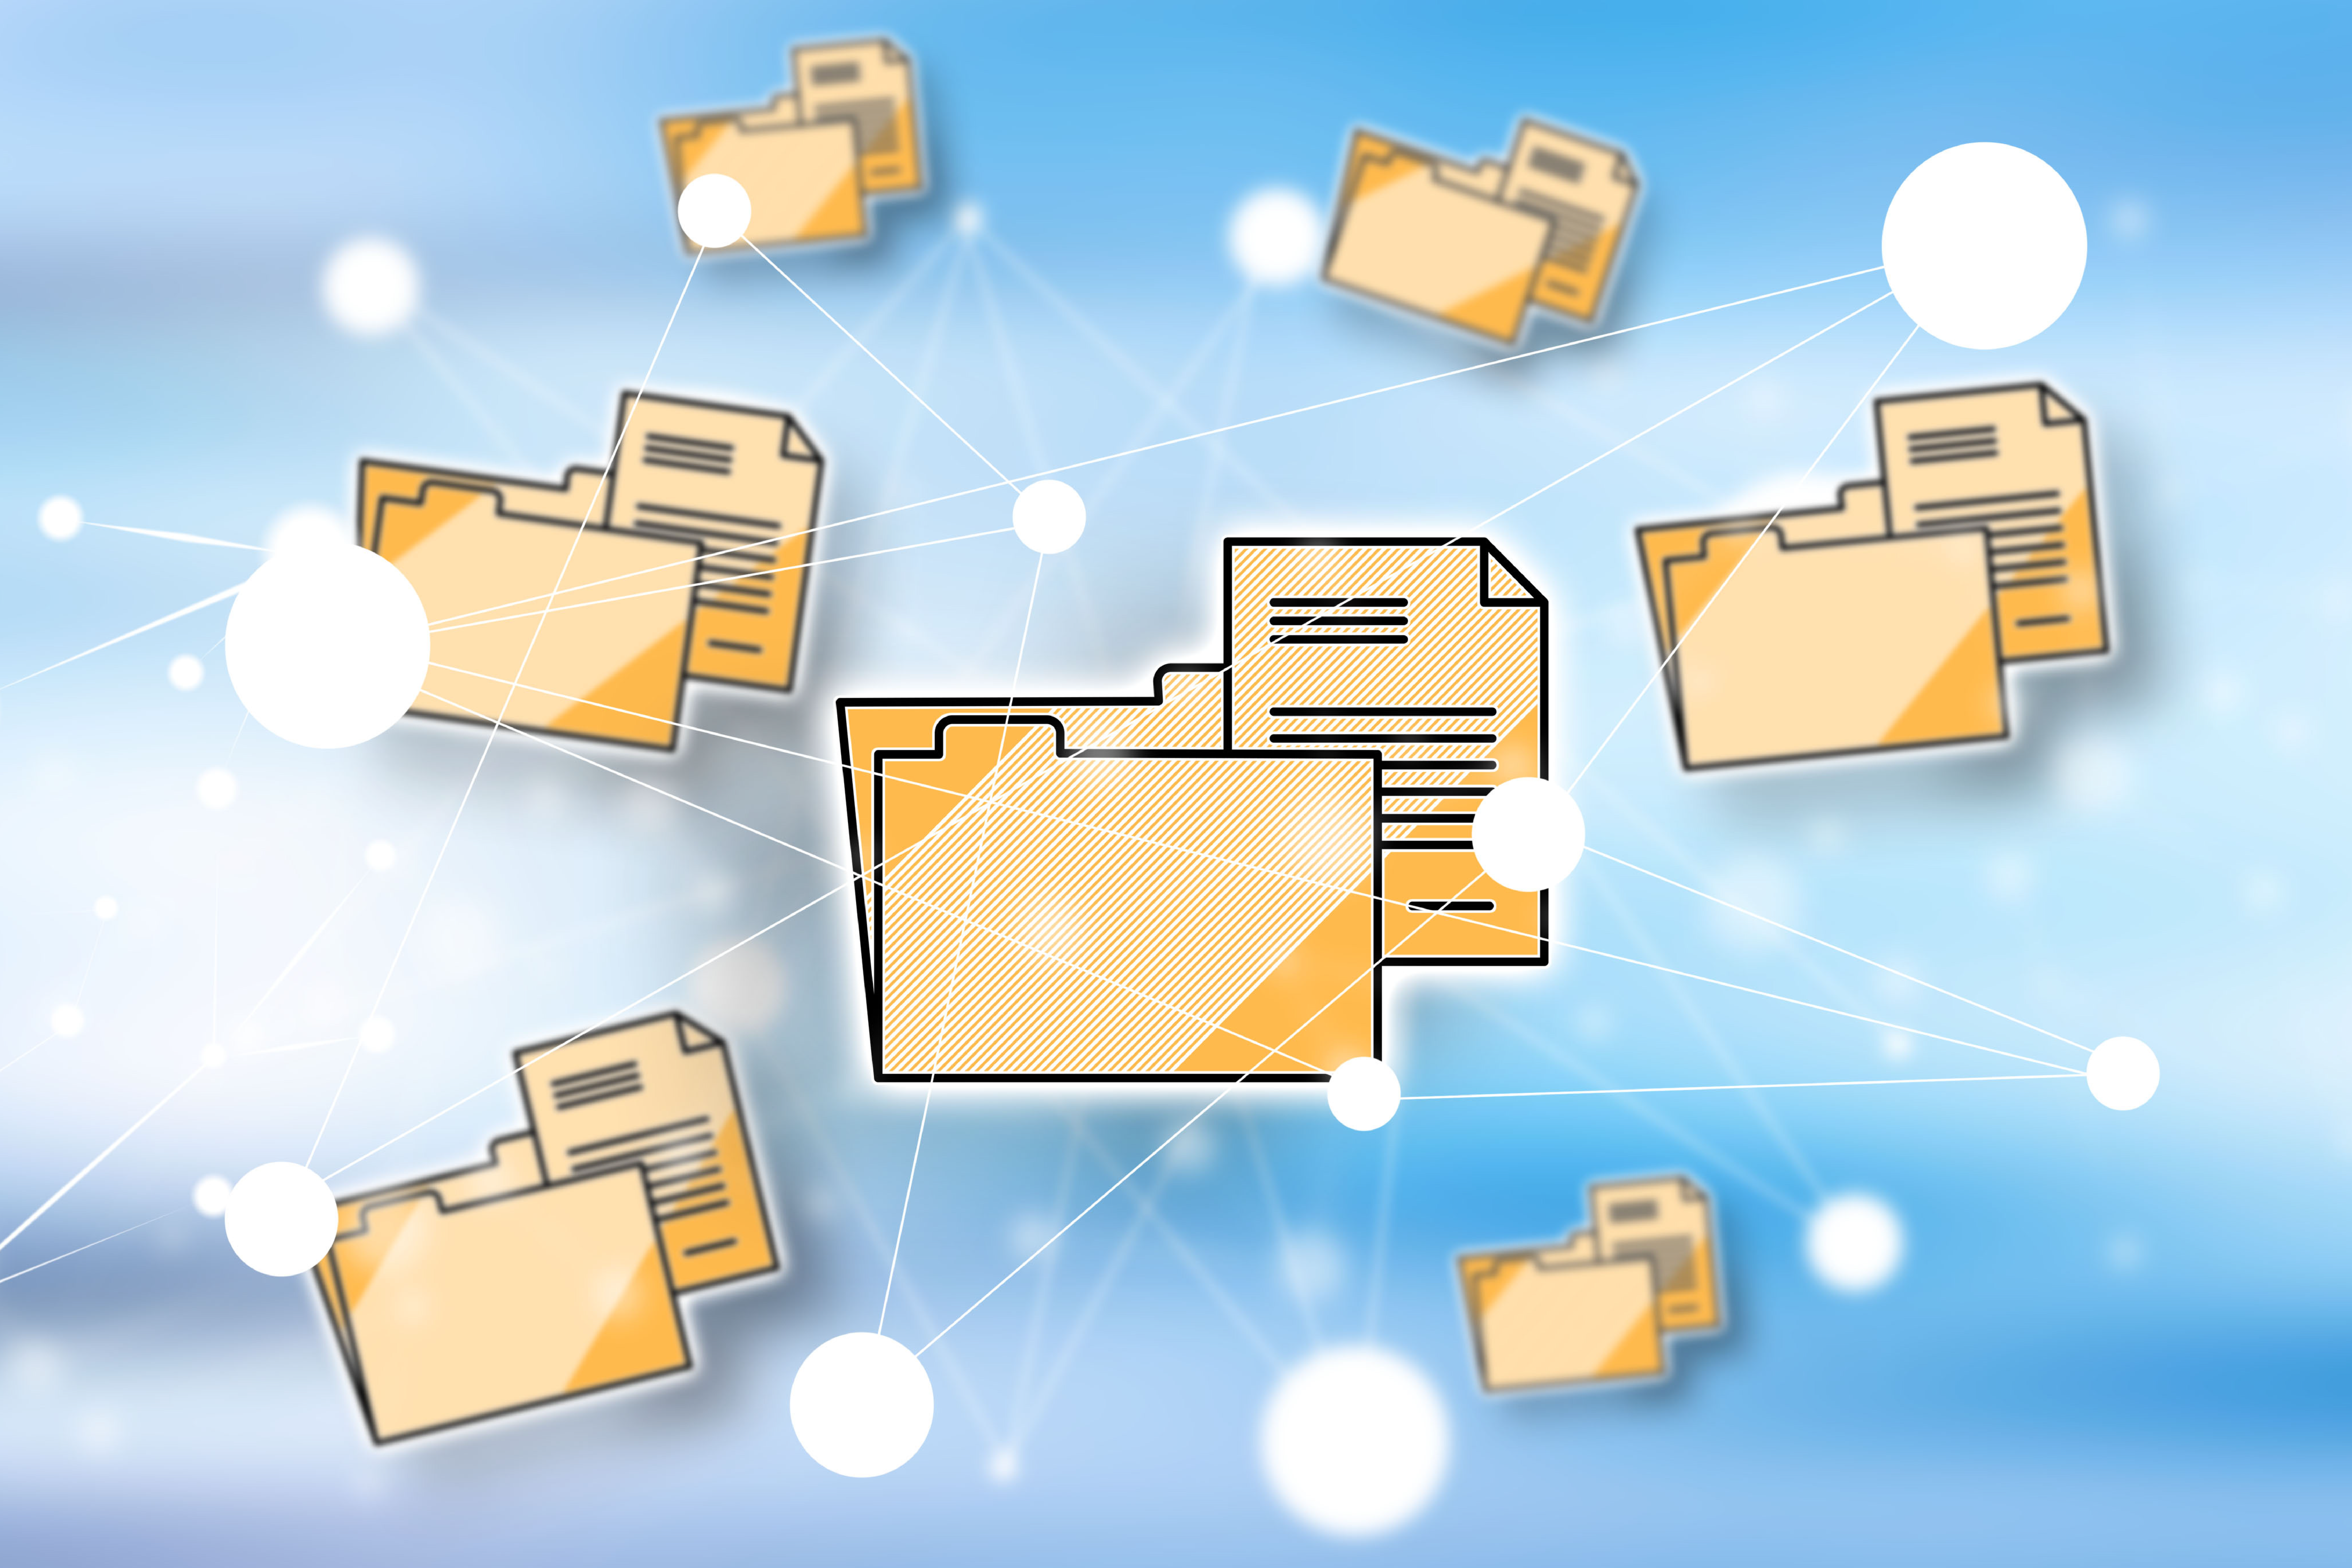 Folders and documents connected by network lines against a blue bokeh background, symbolizing digital file sharing or data management in a cloud network.